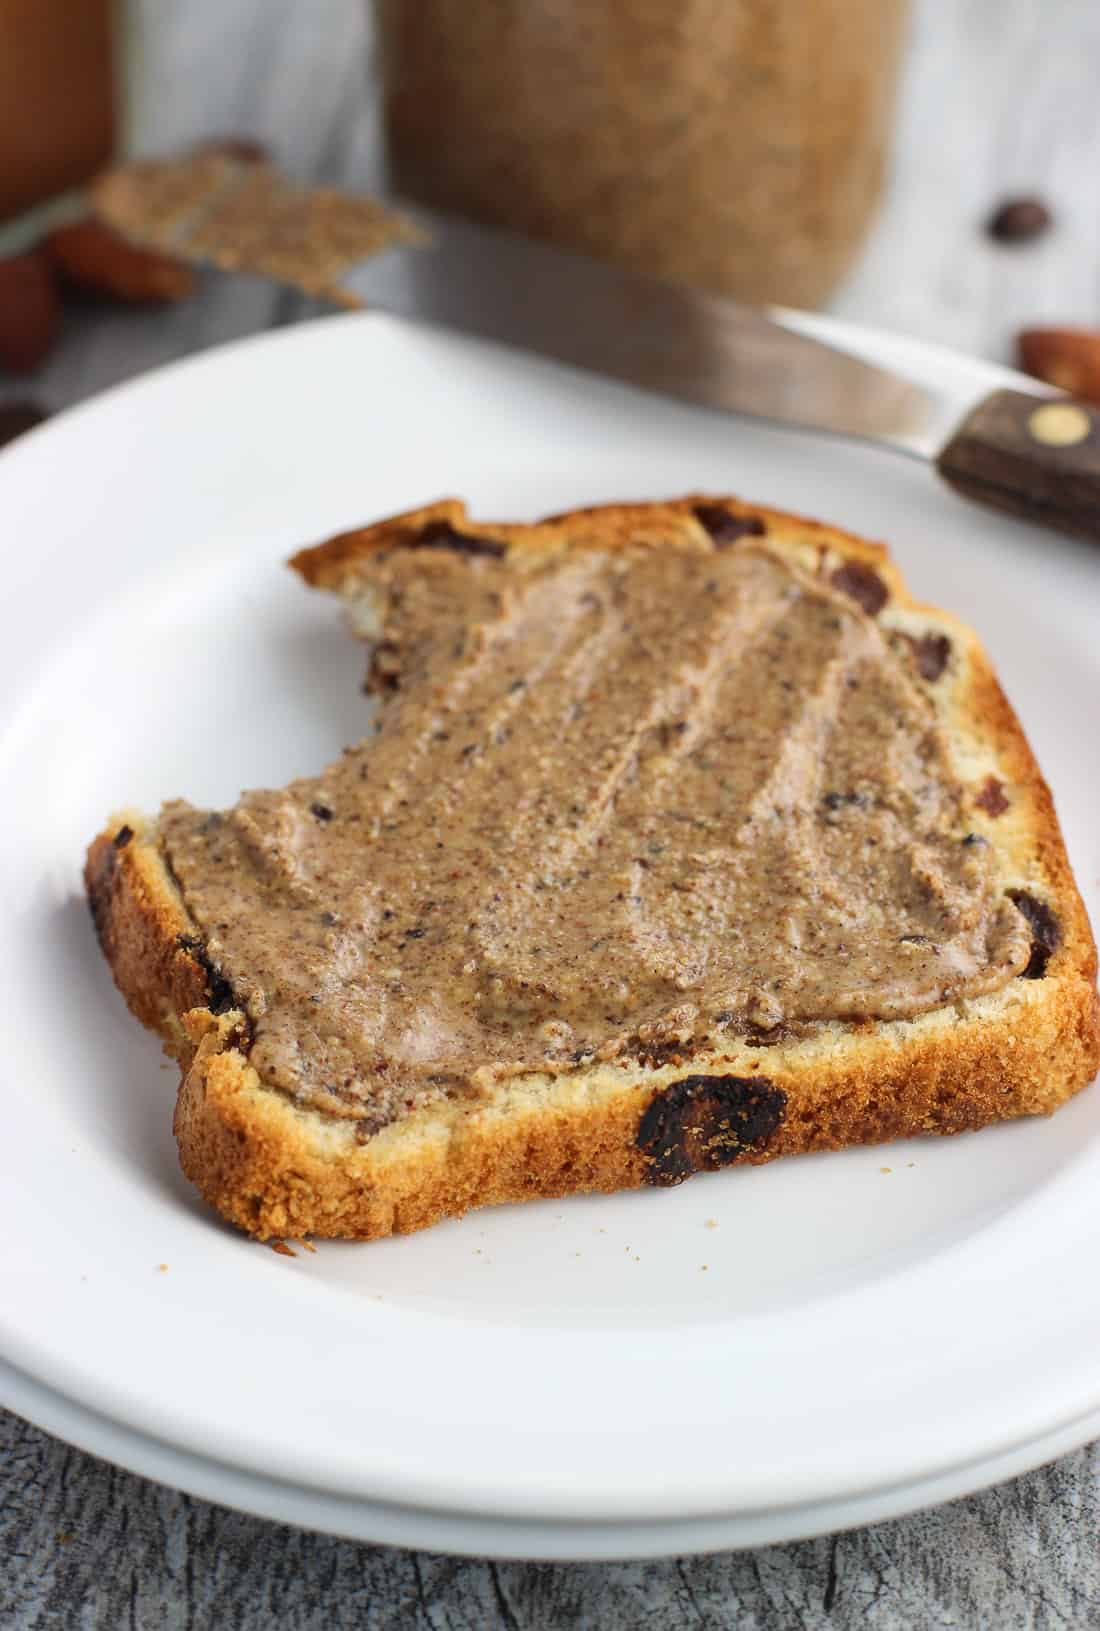 A slice of toast slathered with almond butter with a big bite taken out